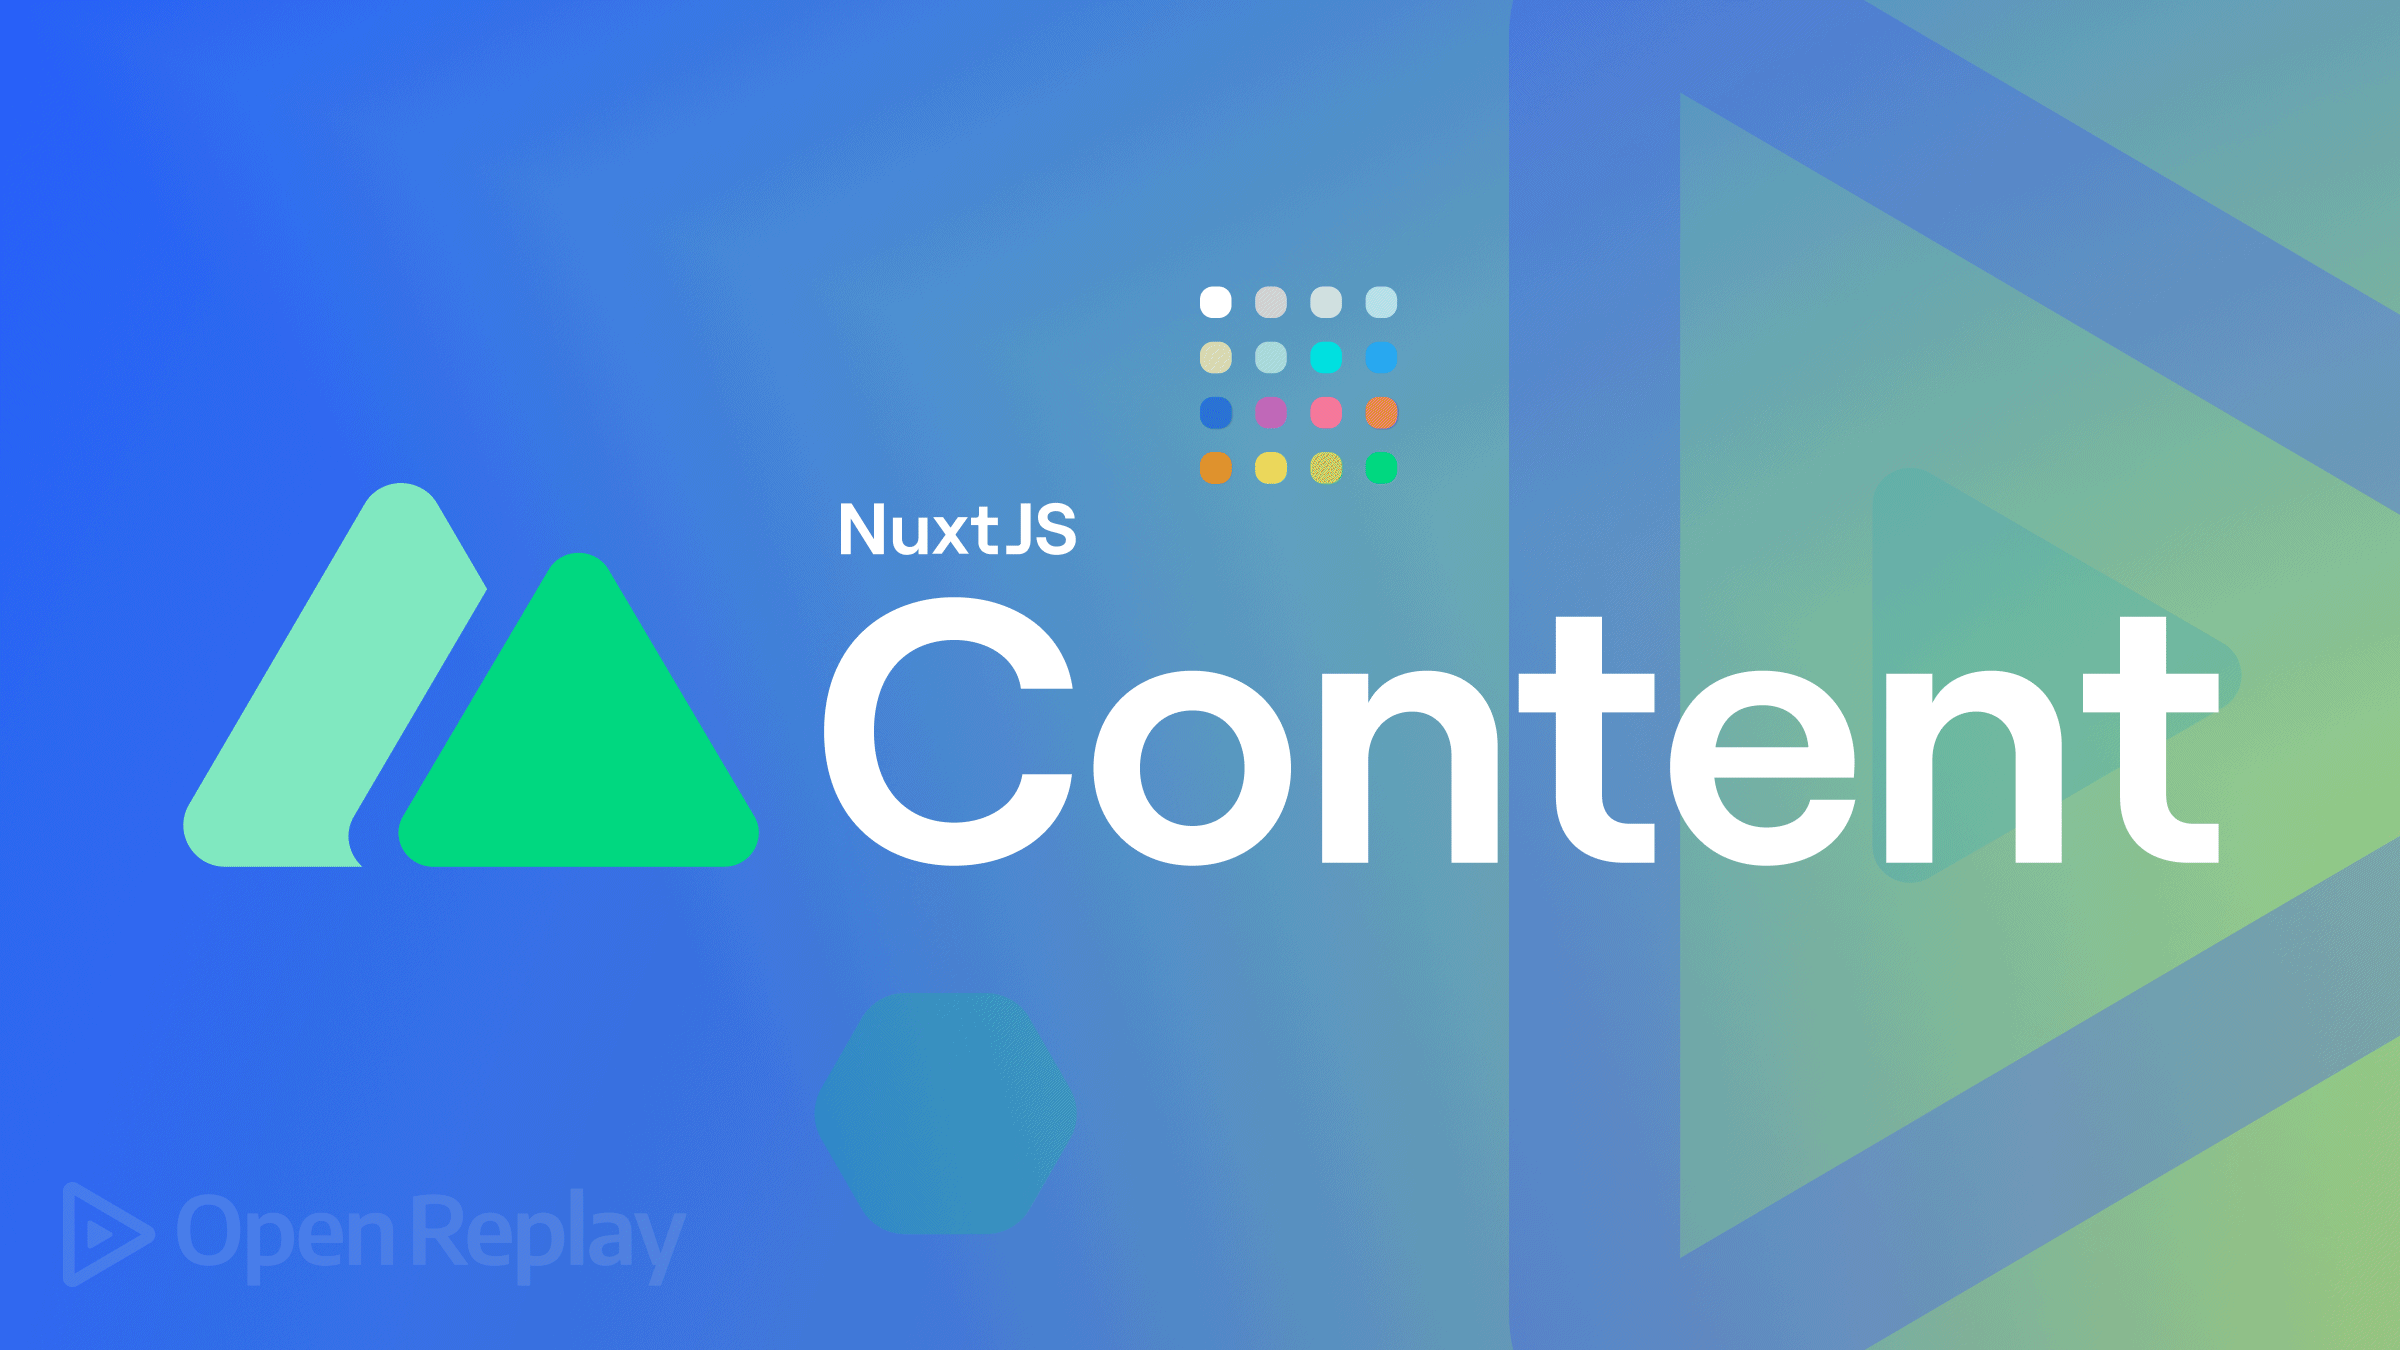 Power your blog with Nuxt Content